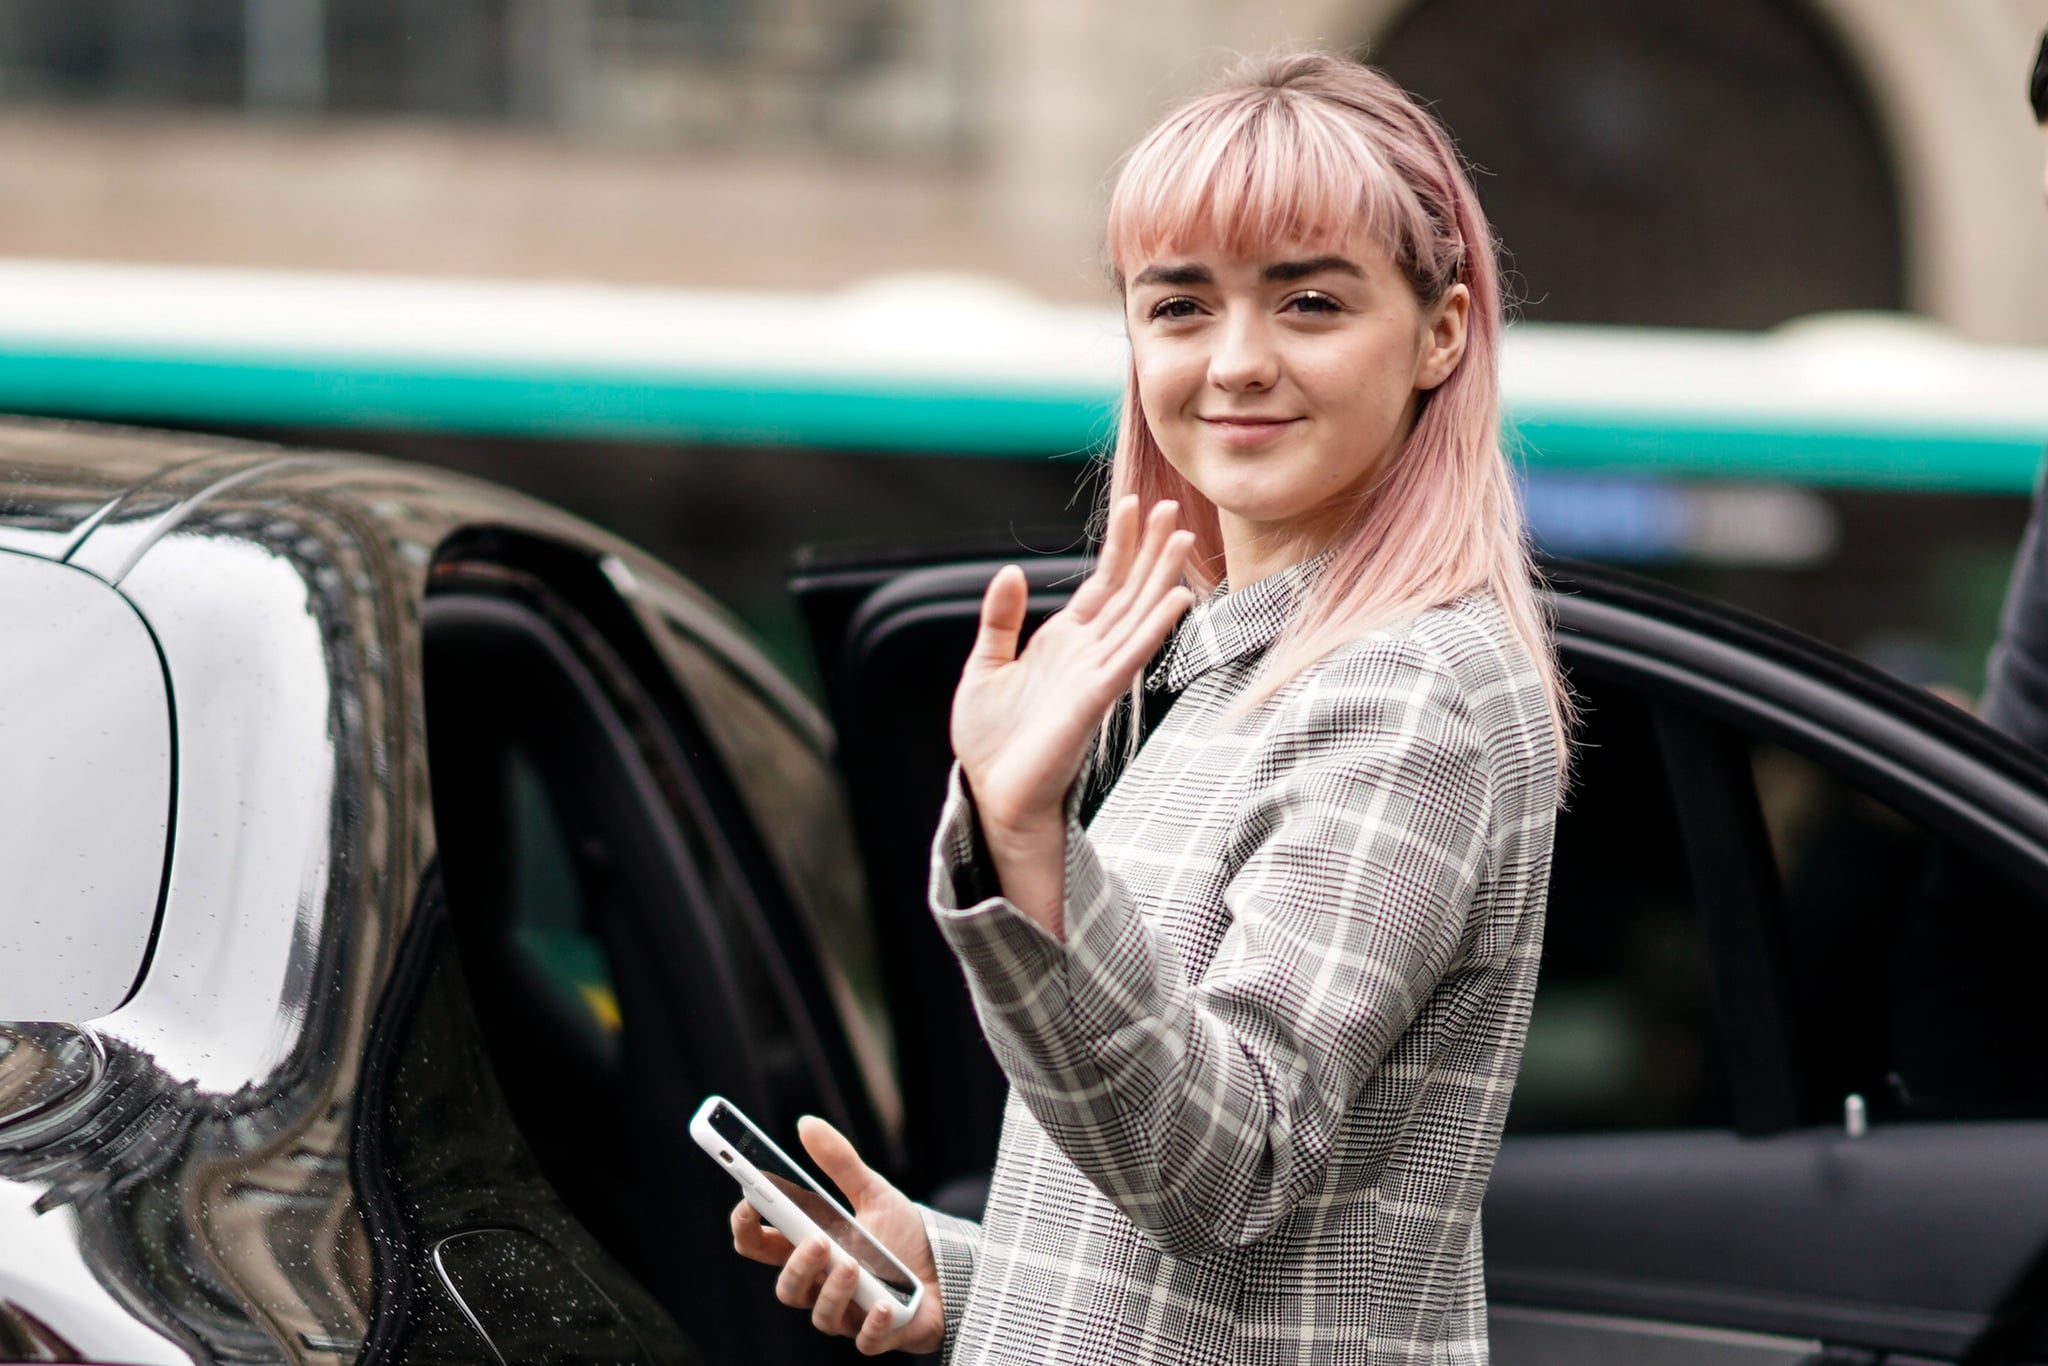 PARIS, FRANCE - MARCH 04: Maisie Williams wears a grey checked dress, outside Stella McCartney, during Paris Fashion Week Womenswear Fall/Winter 2019/2020, on March 04, 2019 in Paris, France. (Photo by Edward Berthelot/Getty Images)